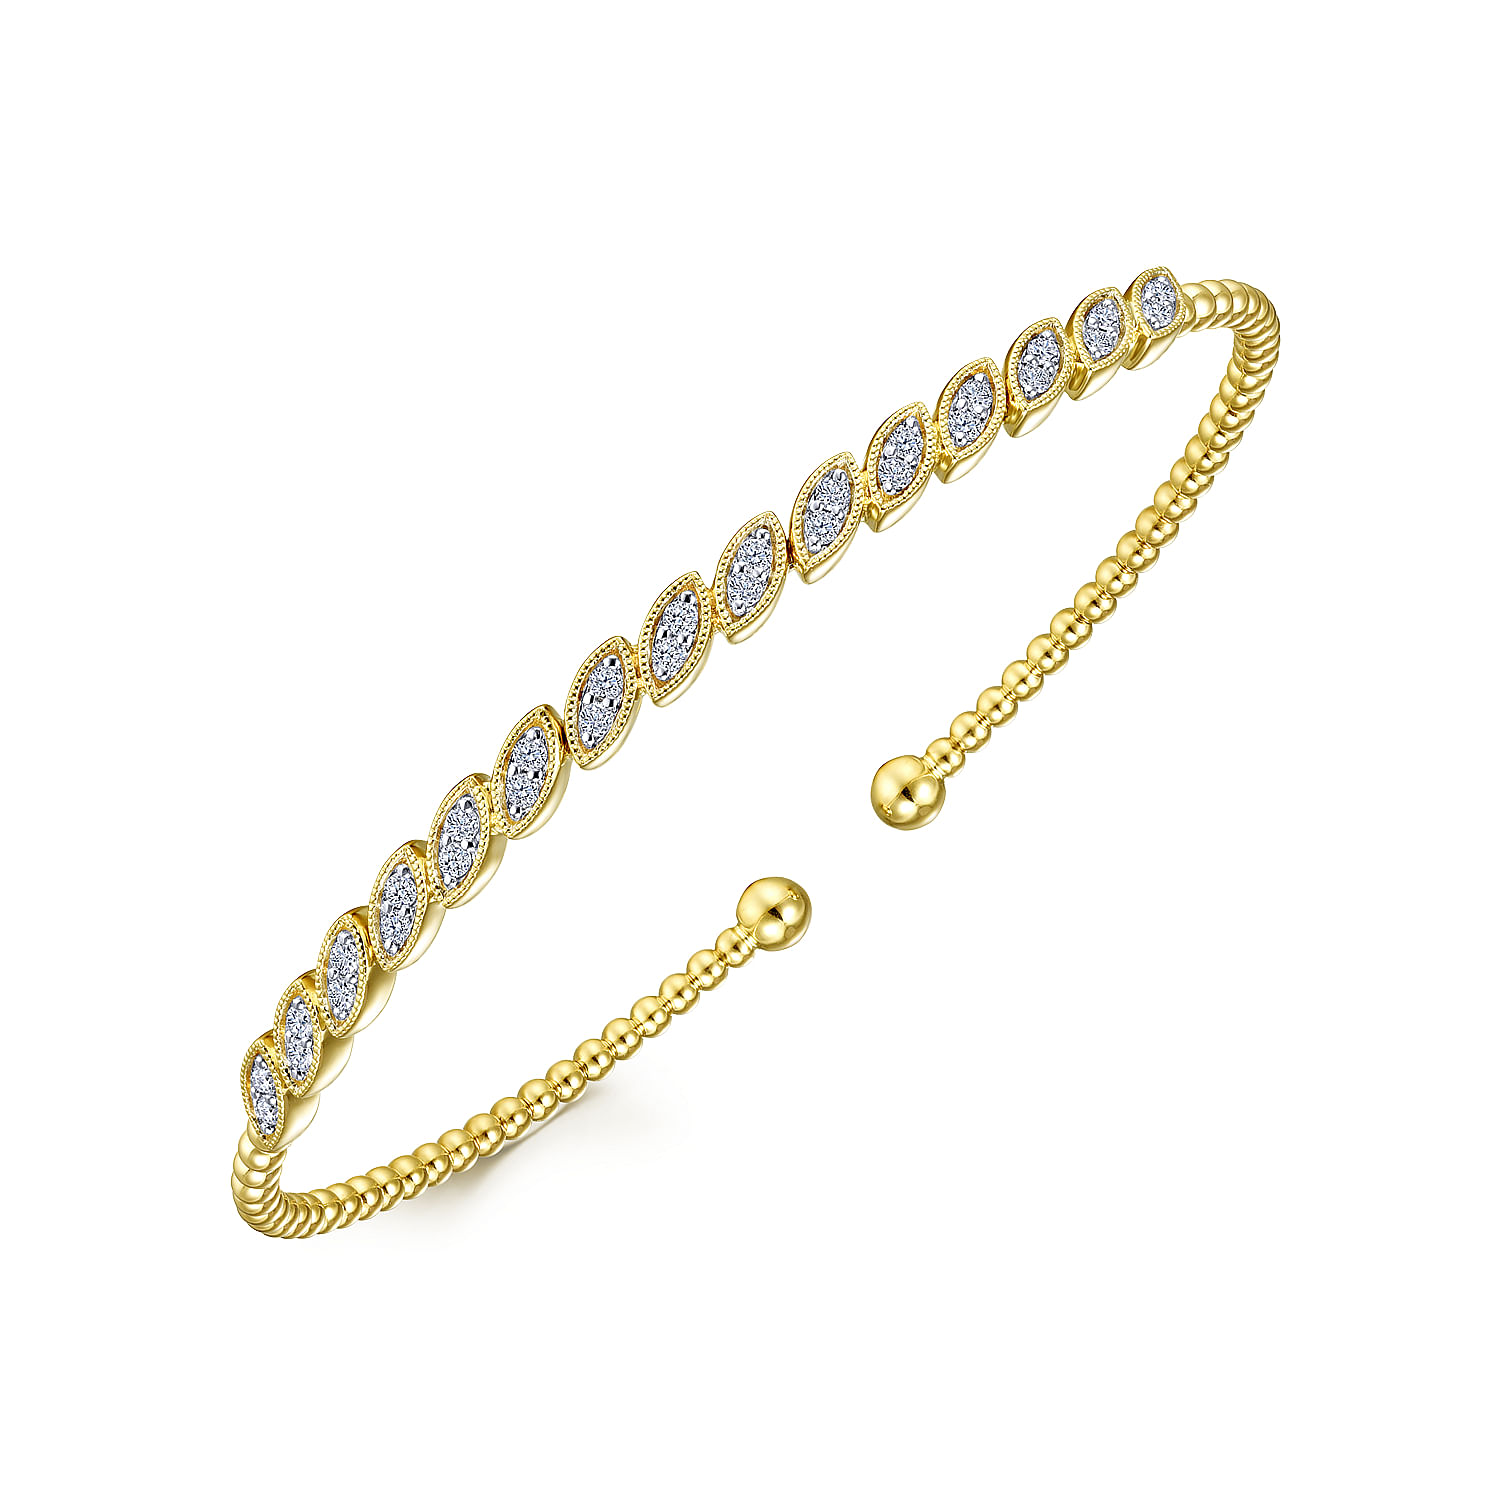 14K Yellow Gold Bujukan Cuff Bracelet with Diamond Filled Marquise Stations